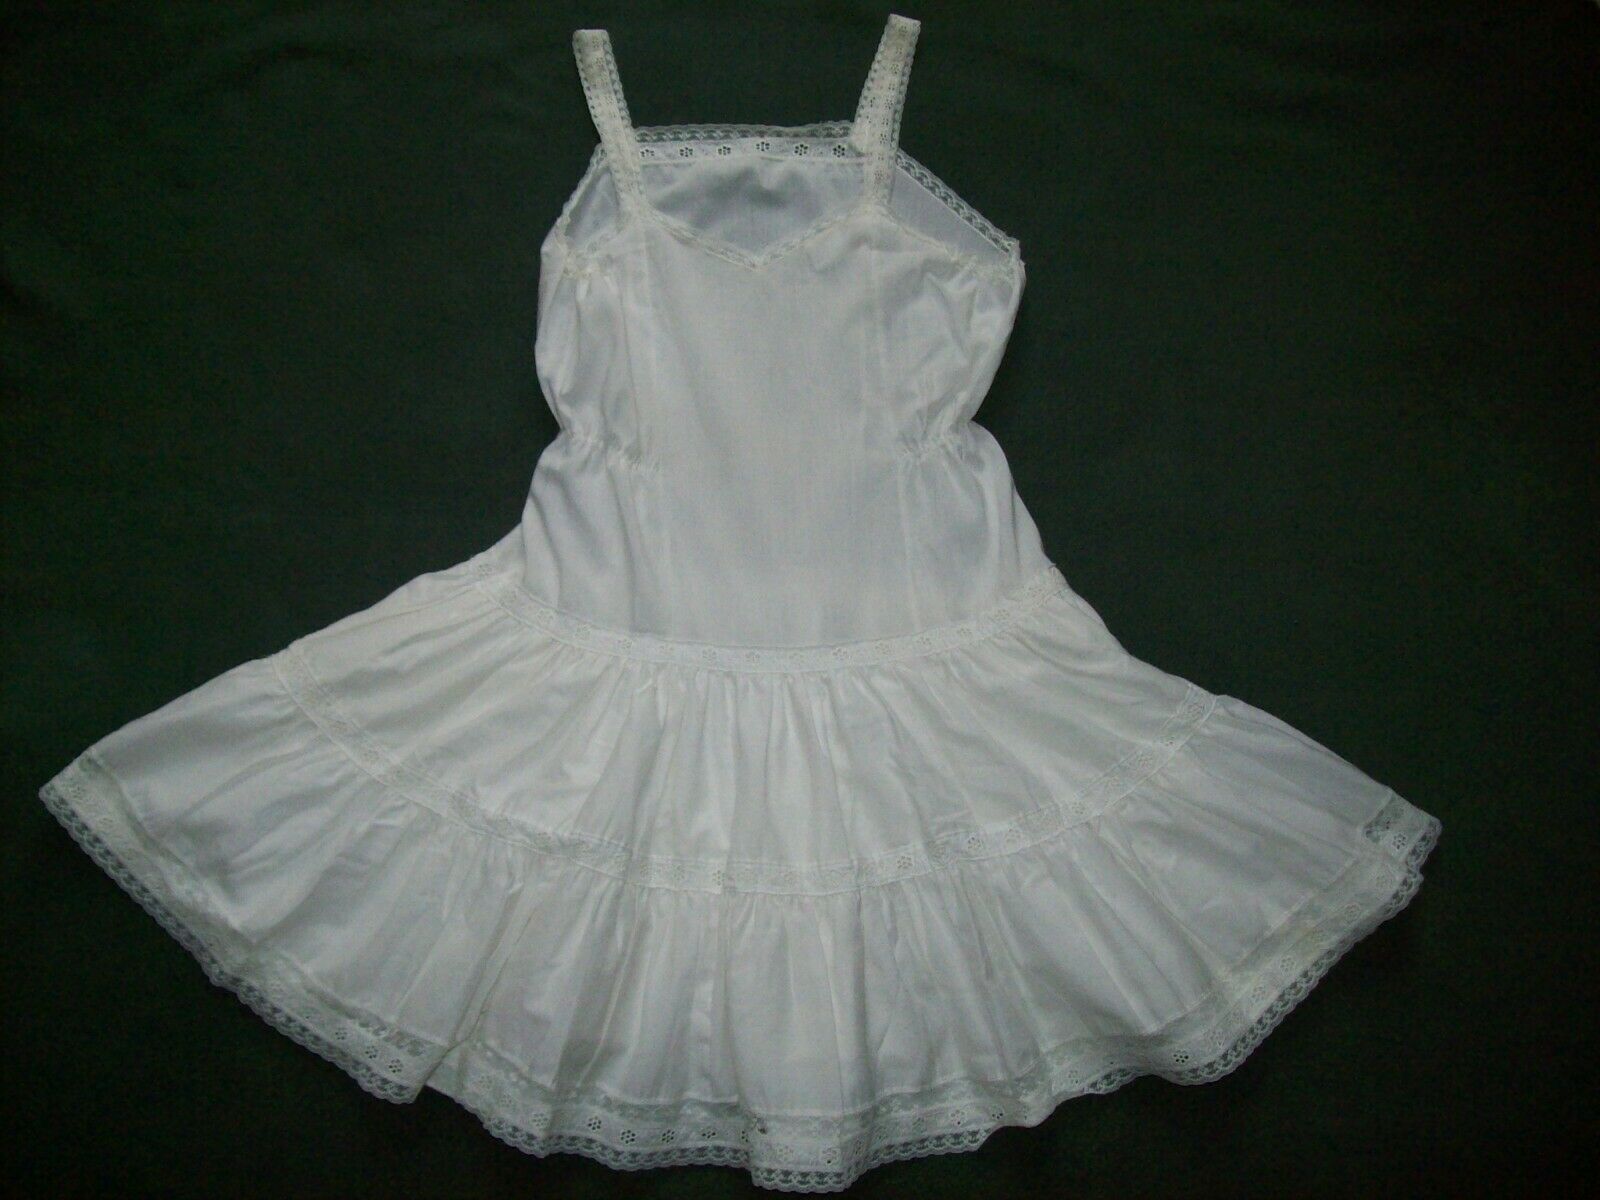 Vintage Girls Size 8 Her Majesty Tiered Petticoat Lace Slip